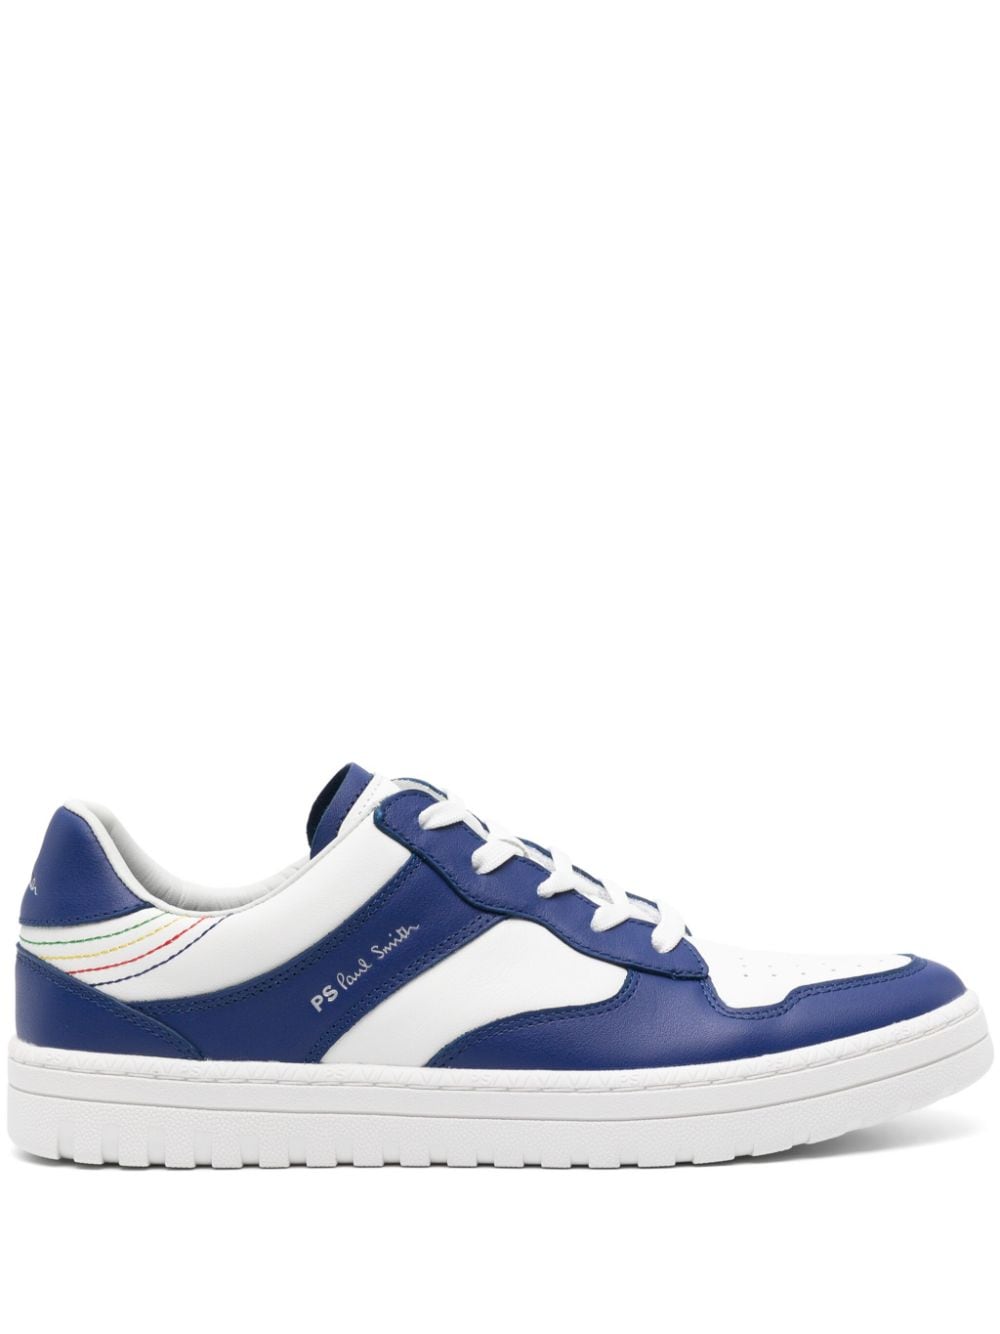 Liston panelled leather sneakers